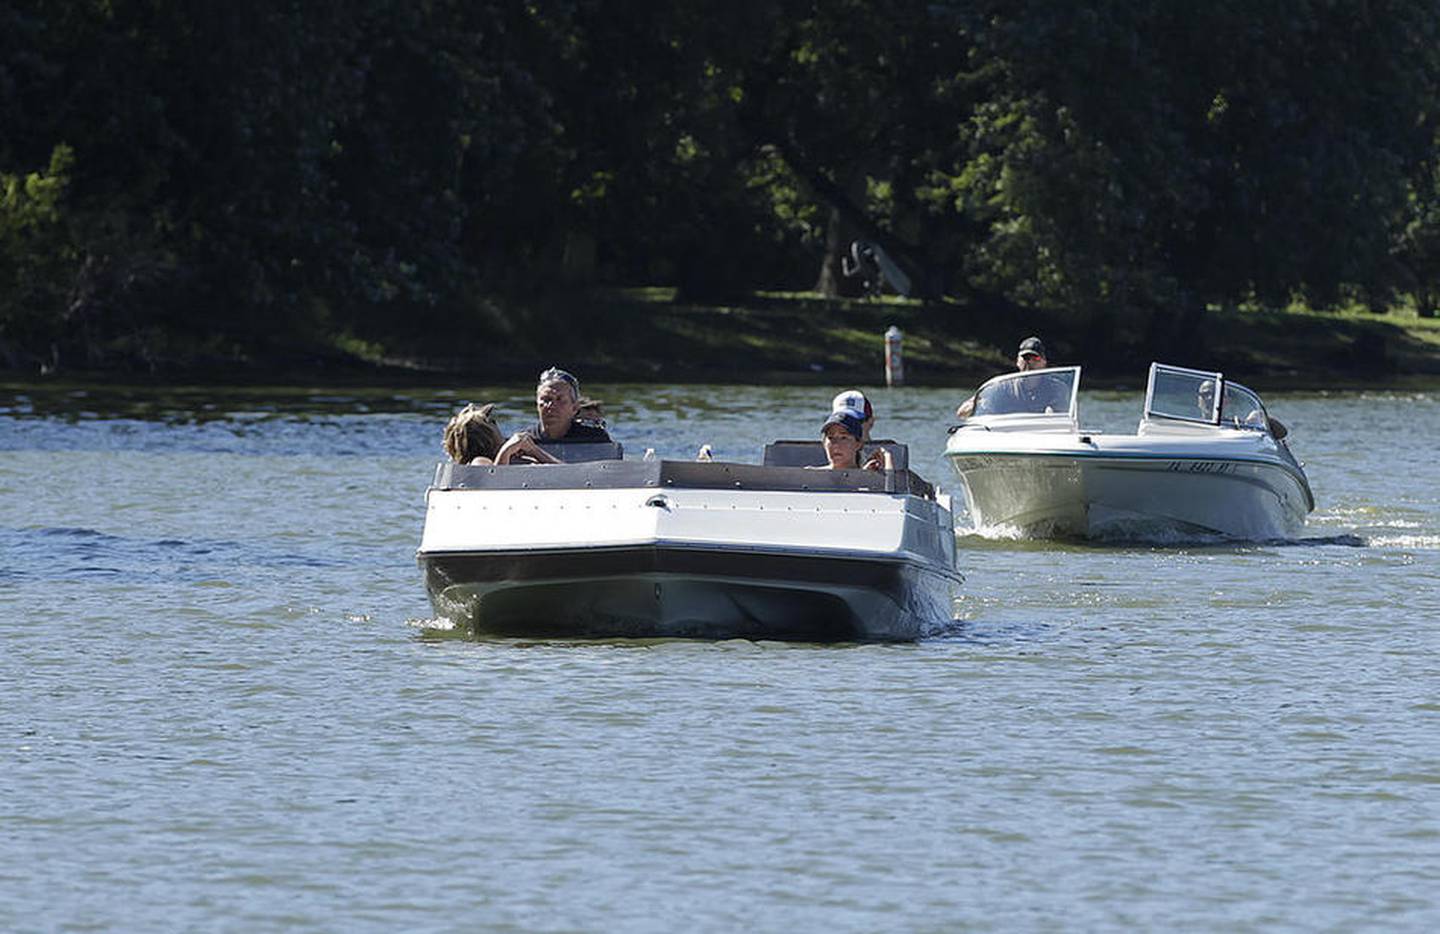 Boaters on the Fox River Friday, Sept. 2, 2016 observer the no wake zone south of the Stratton Lock and Dam near McHenry.